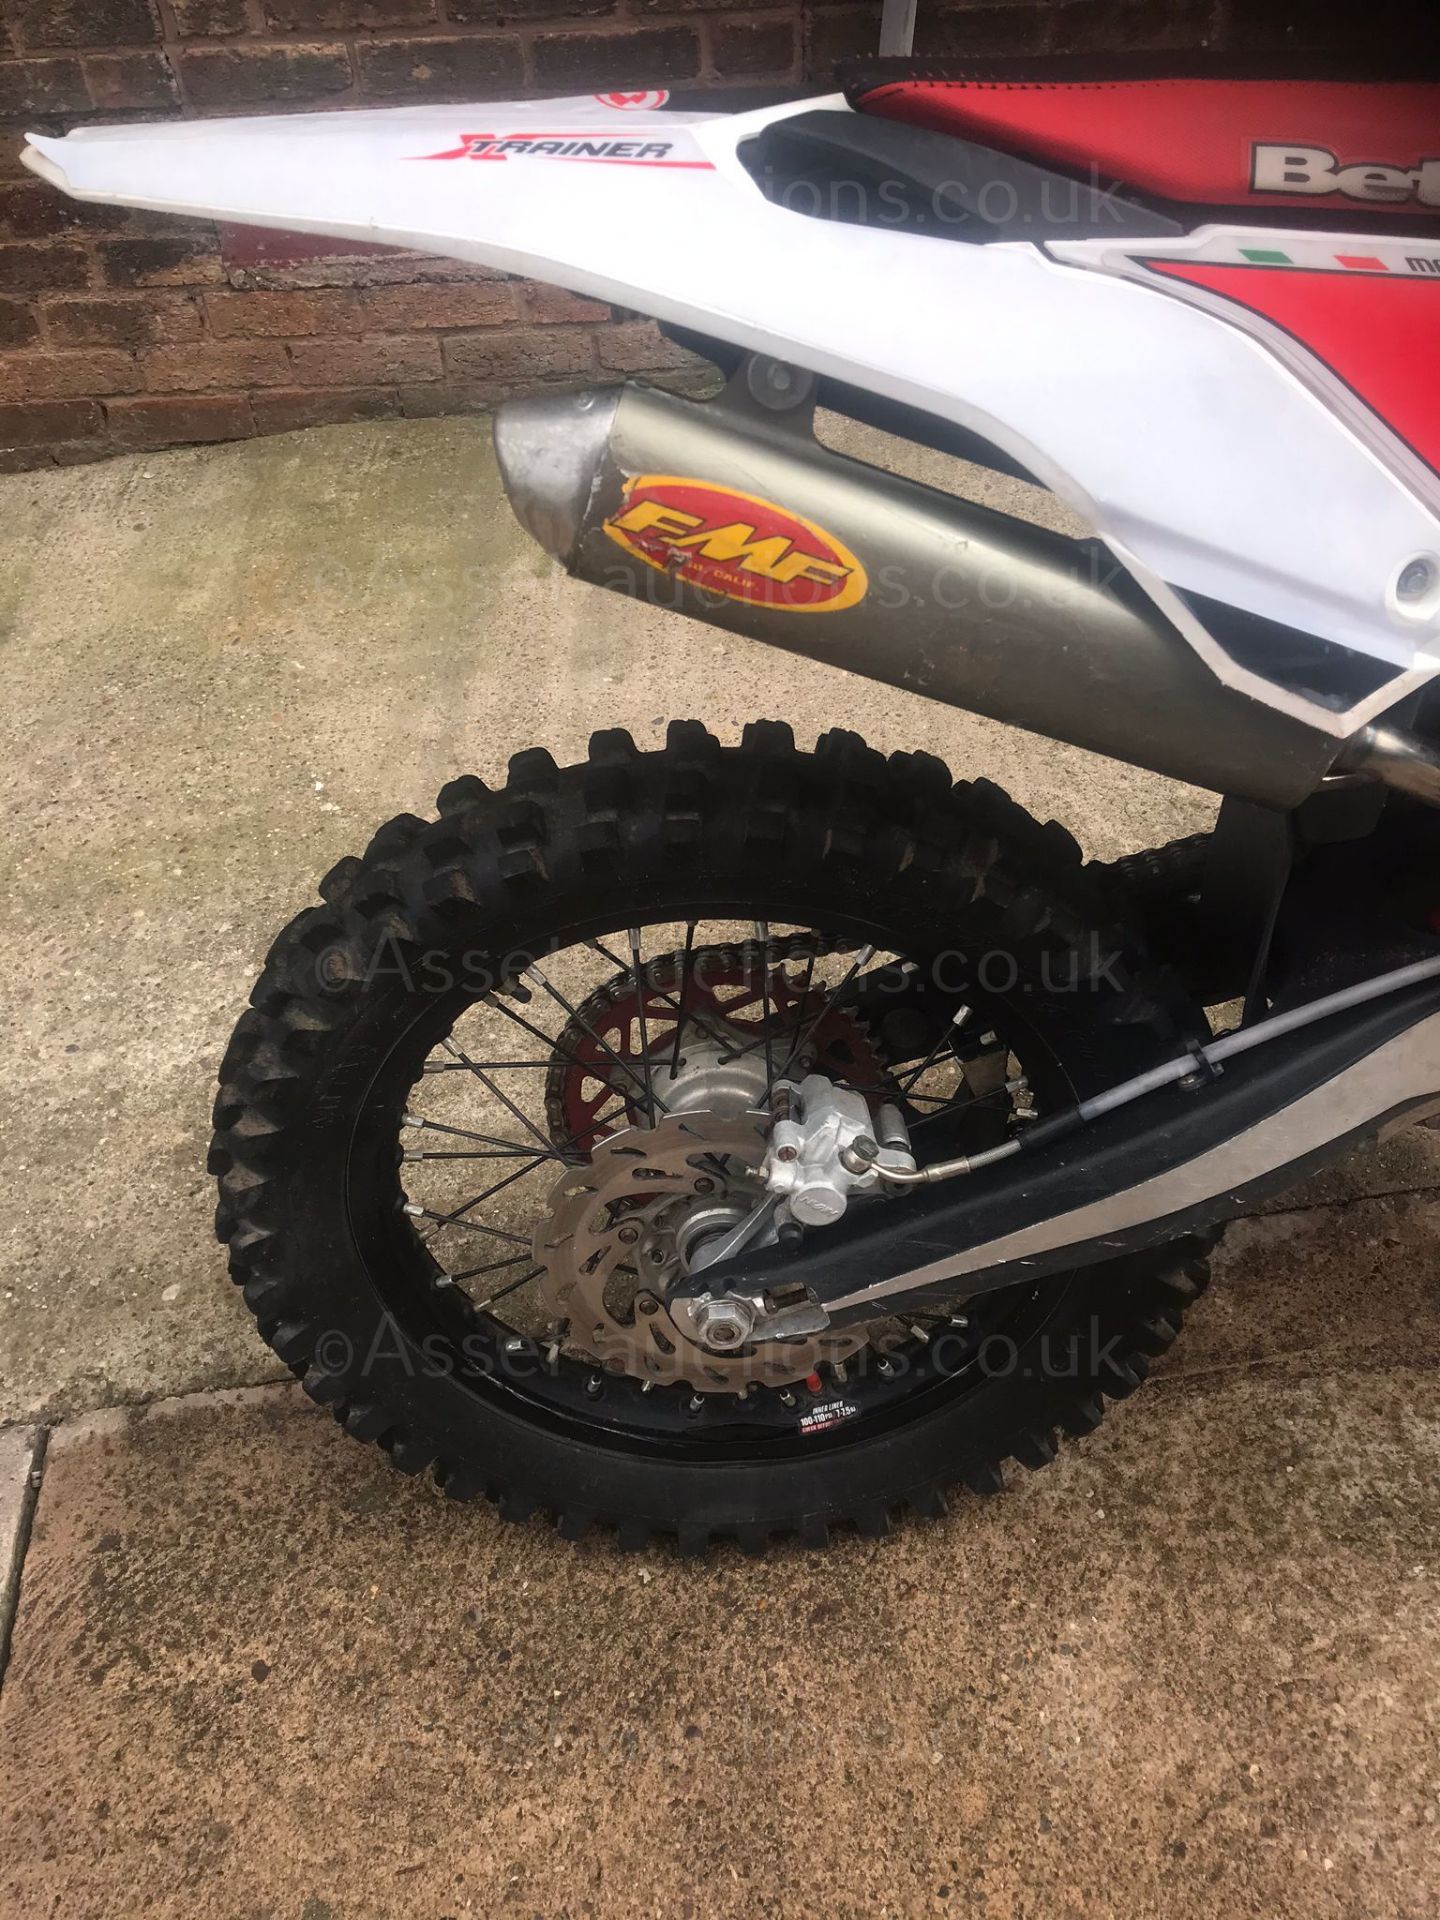 2016 BETA XTRAINER 300, ROAD REGISTERED, FRAME GUARDS, ENGINE GUARDS, FMF GNARLY PIPE *NO VAT* - Image 2 of 4